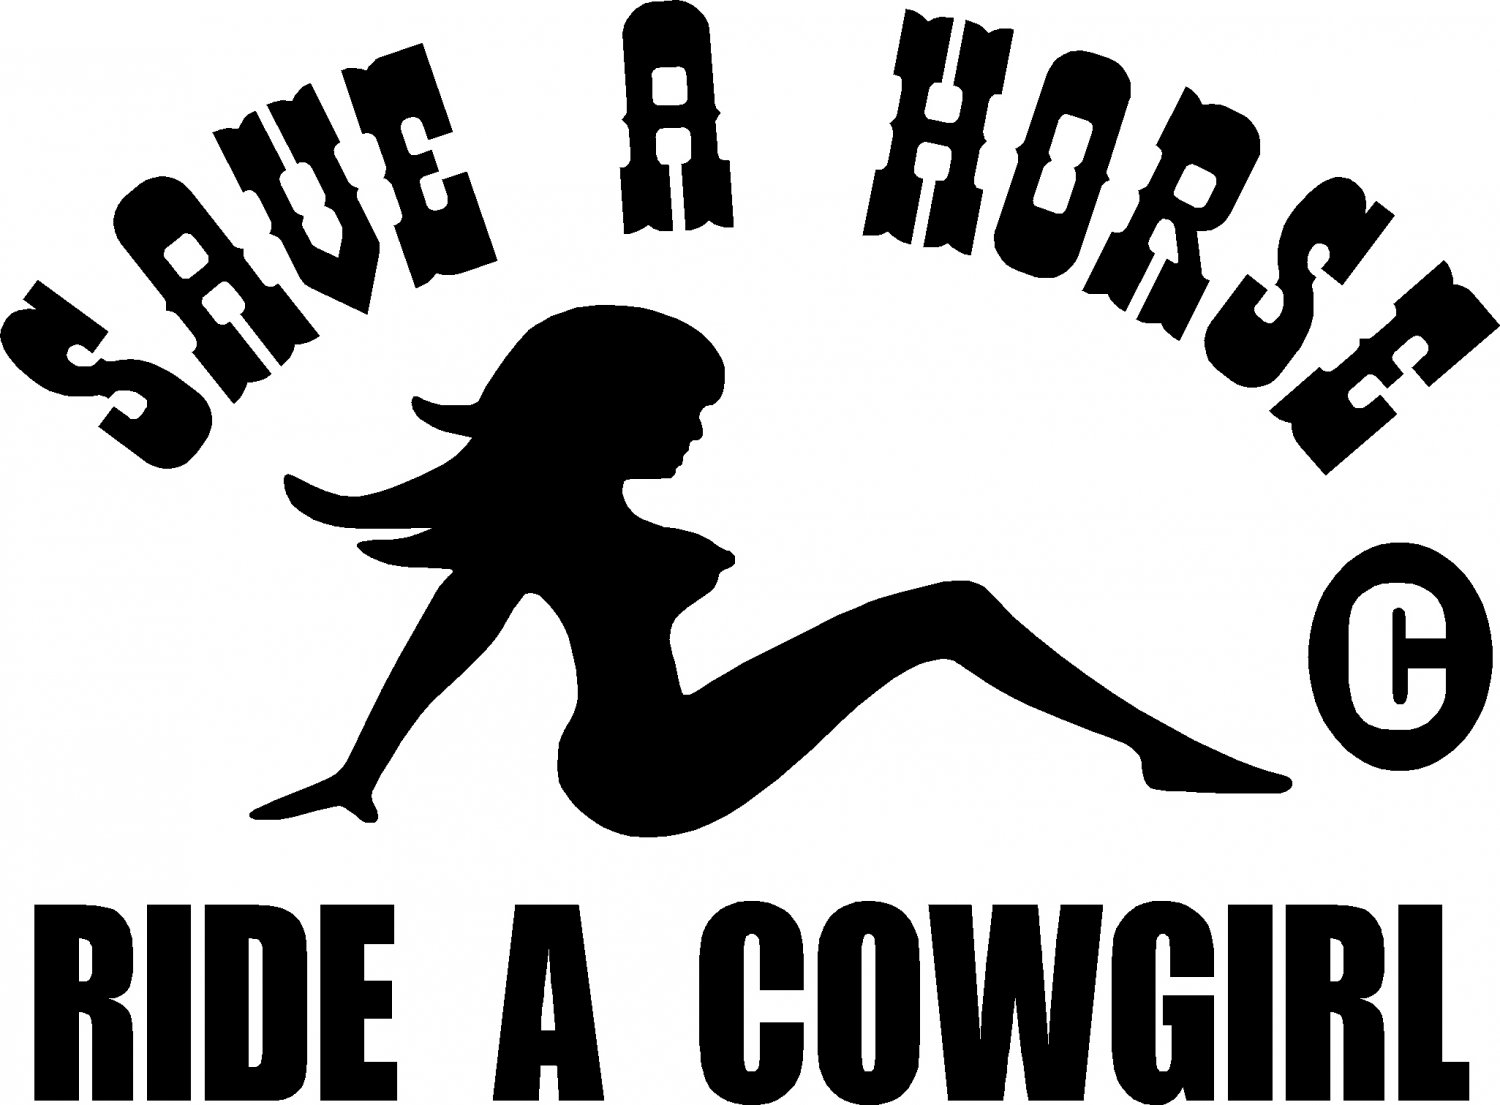 SAVE A HORSE RIDE A COWGIRL VINYL DECAL STICKER